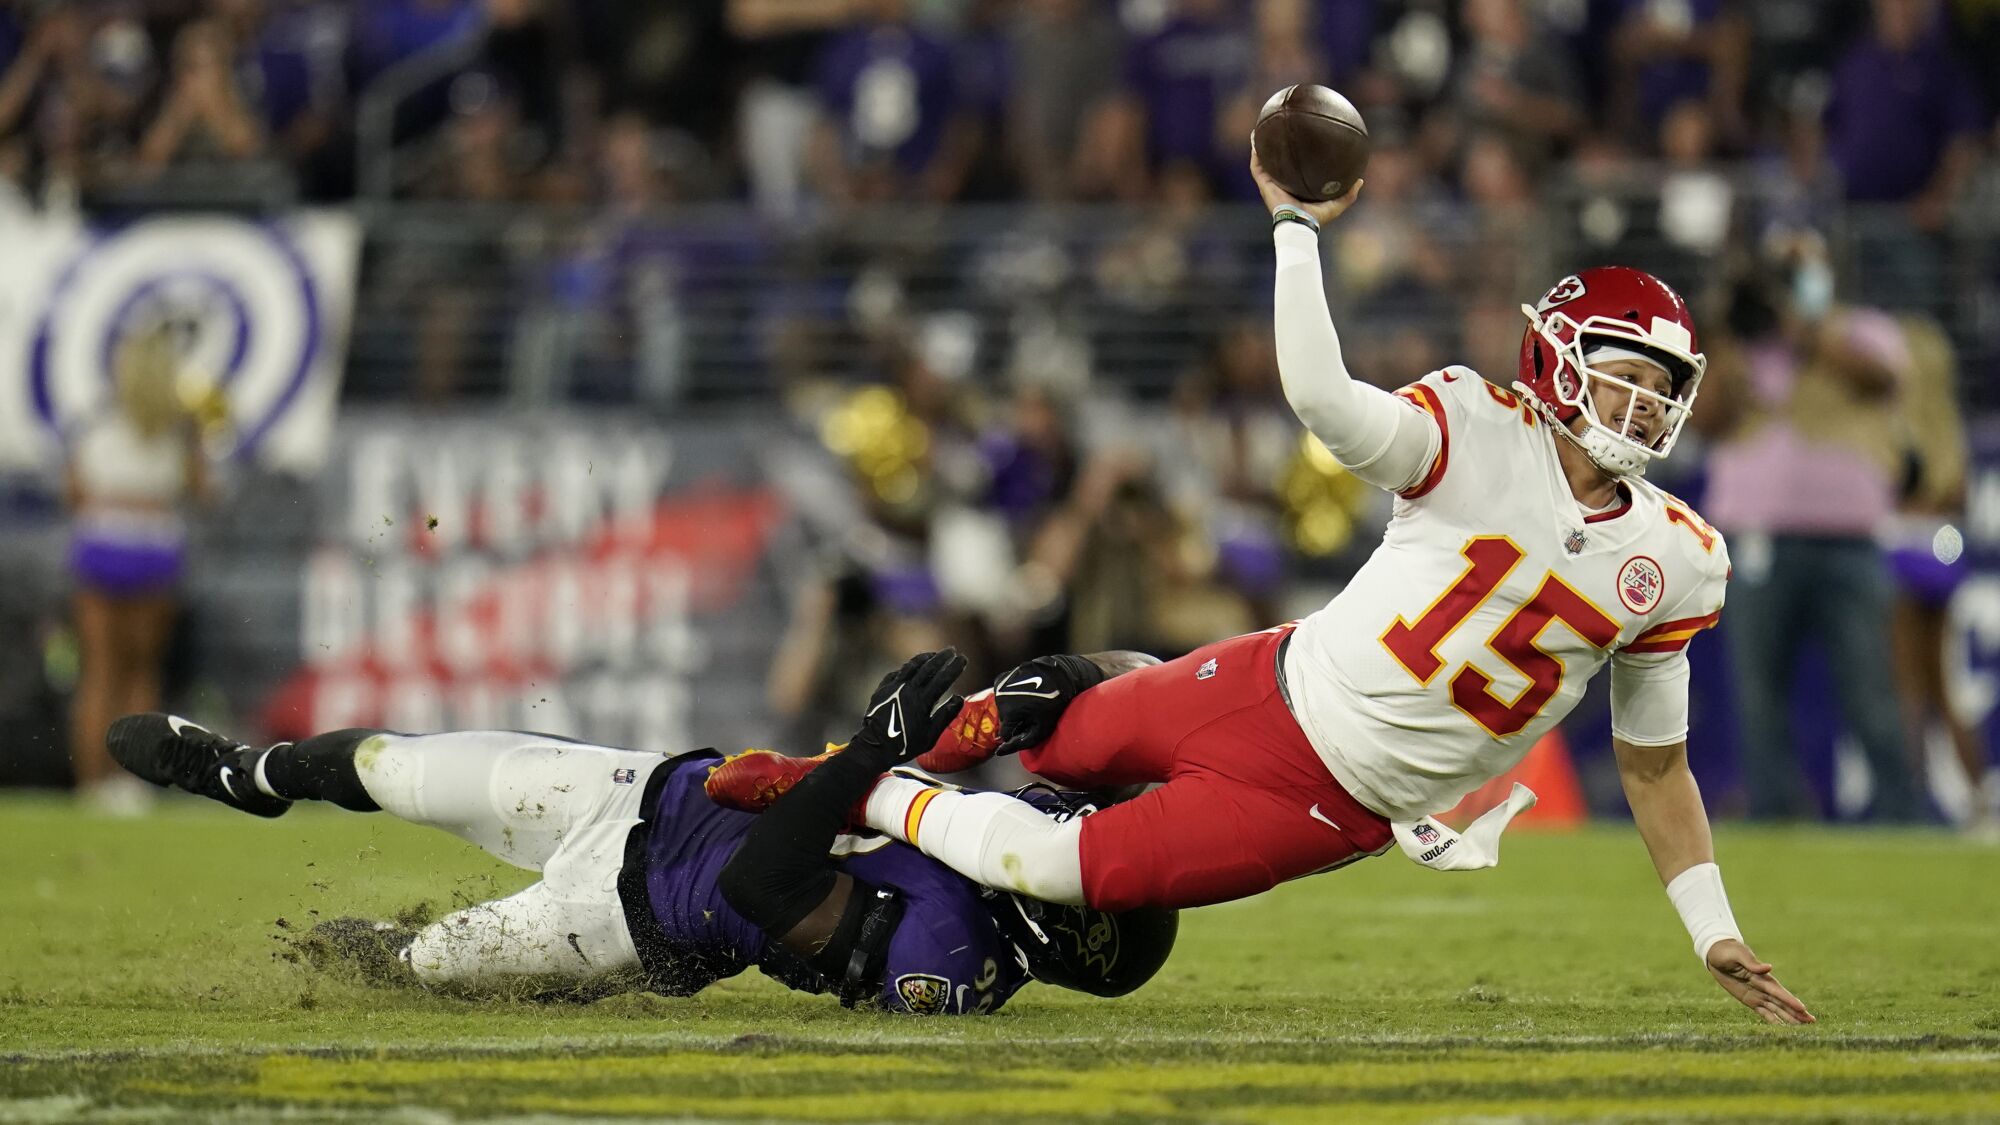 Kansas City Chiefs quarterback Patrick Mahomes throws as he is tackled by Baltimore Ravens linebacker Odafe Oweh.